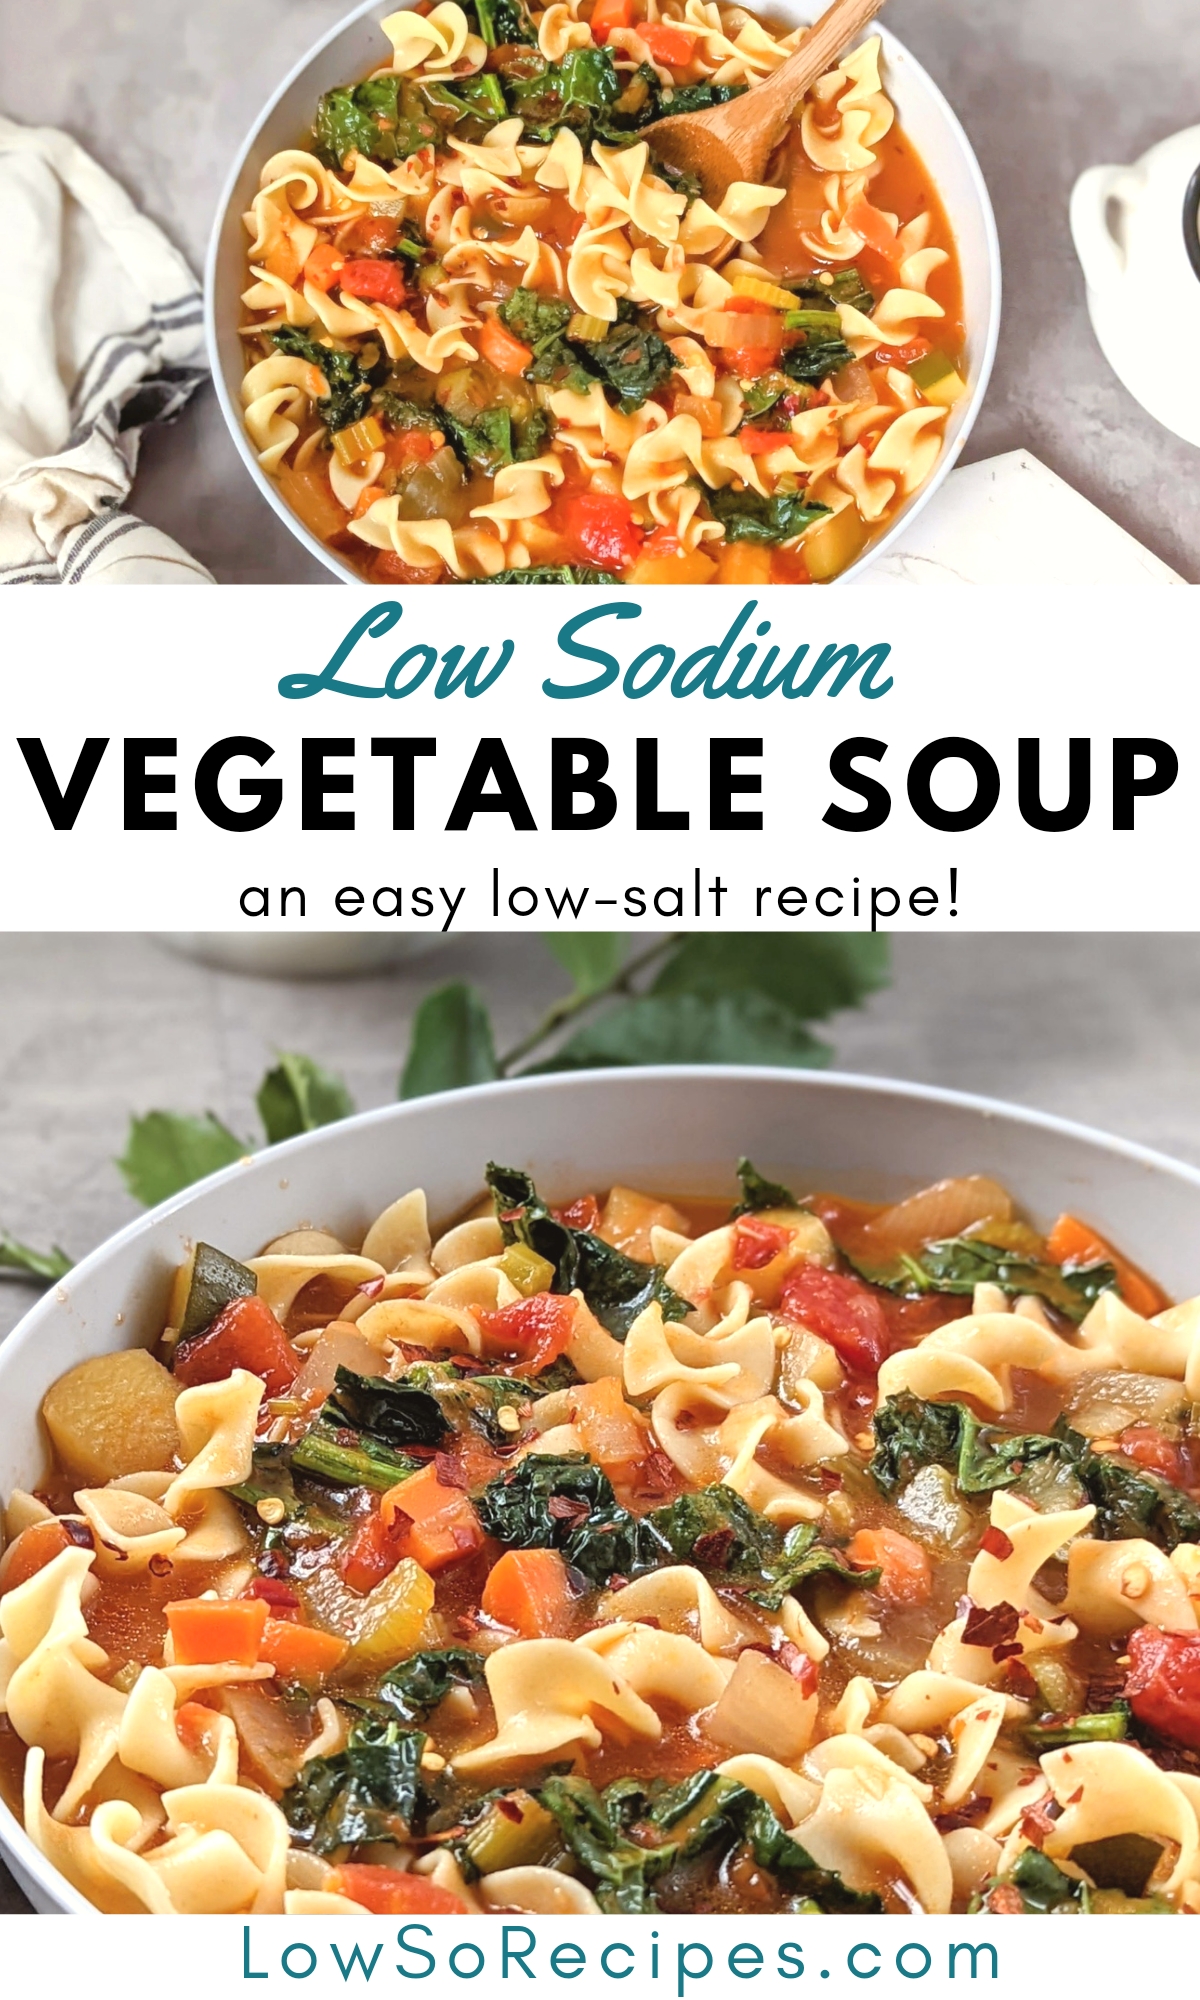 low sodium vegetable soup recipe with egg noodles low salt recipes for lunch or dinner